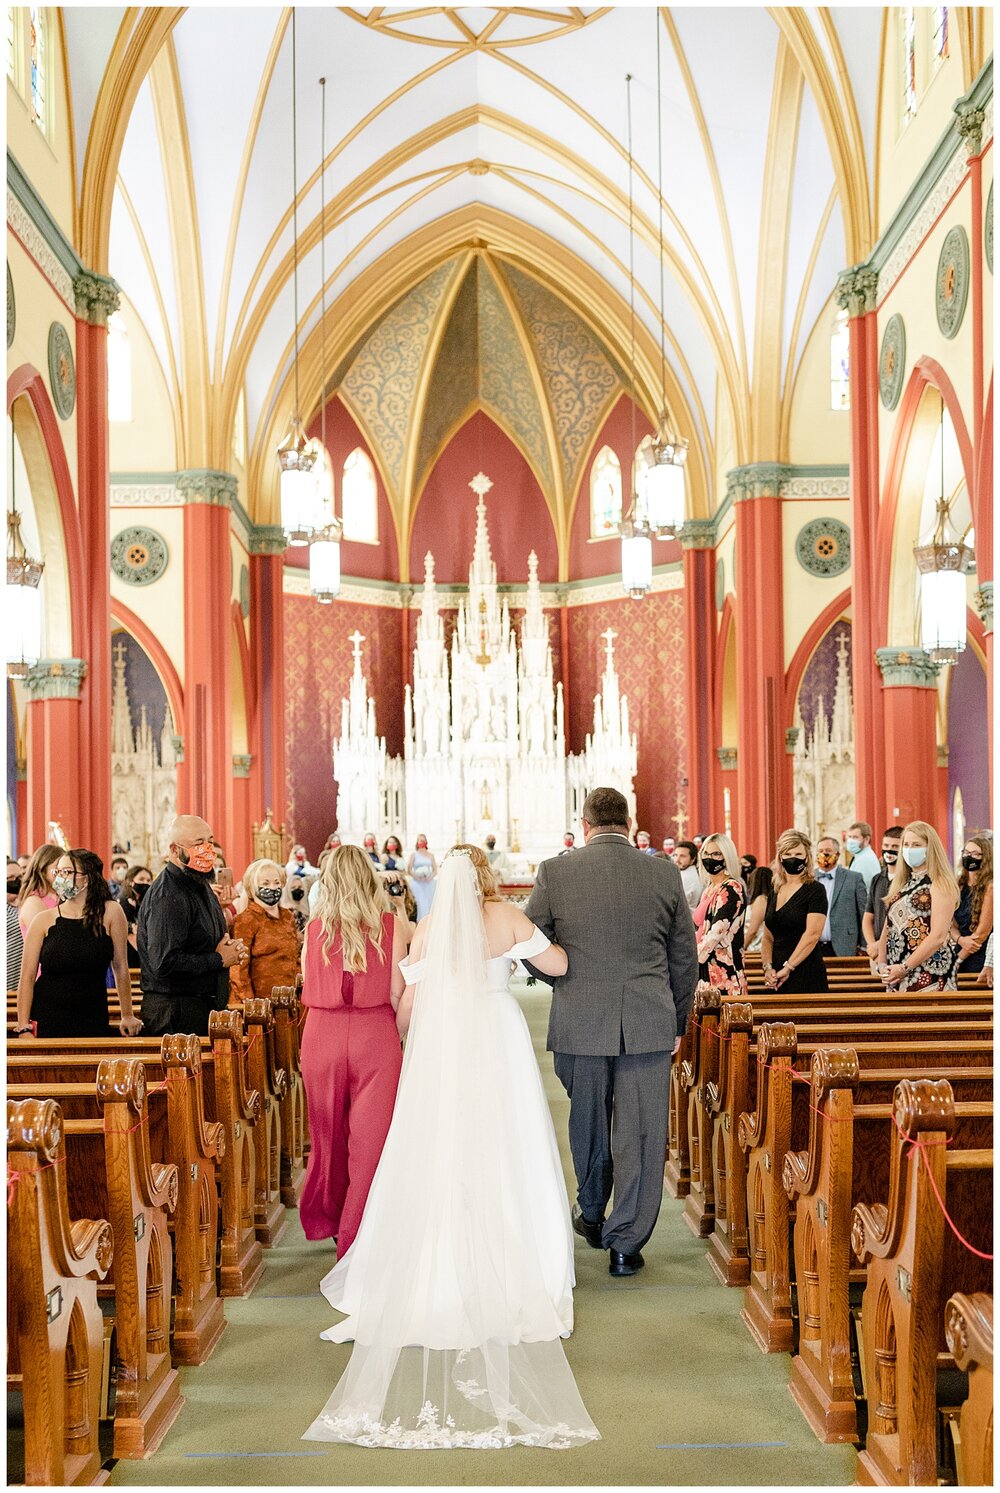 Bride's parent's walking her down the aisle at A Holy Family Cathedral Wedding.